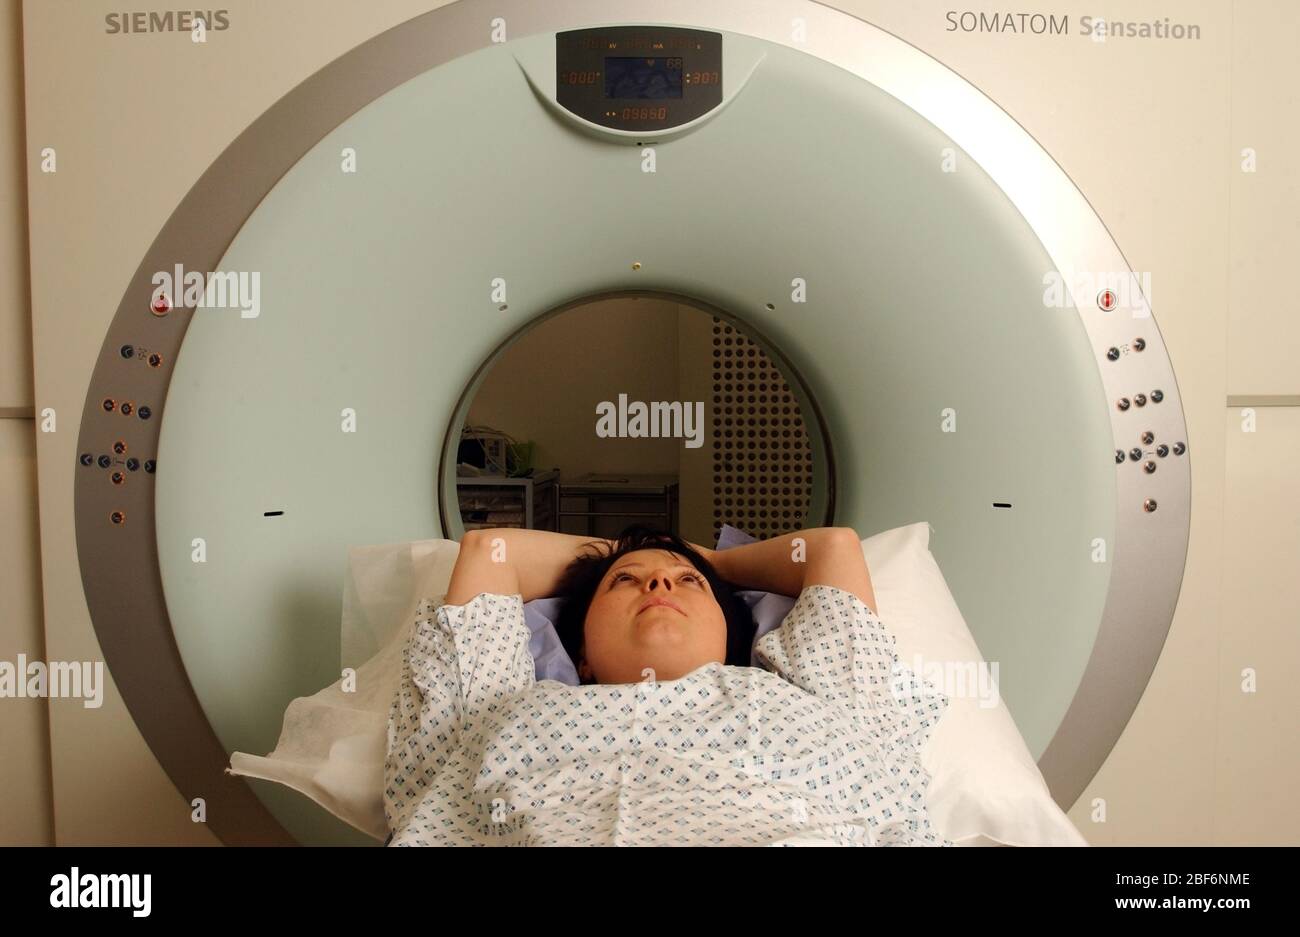 A Siemens CT scanner A patient lies on the examination table of a computed tomography scanner, better known as CAT or CT scanner, which produces three Stock Photo